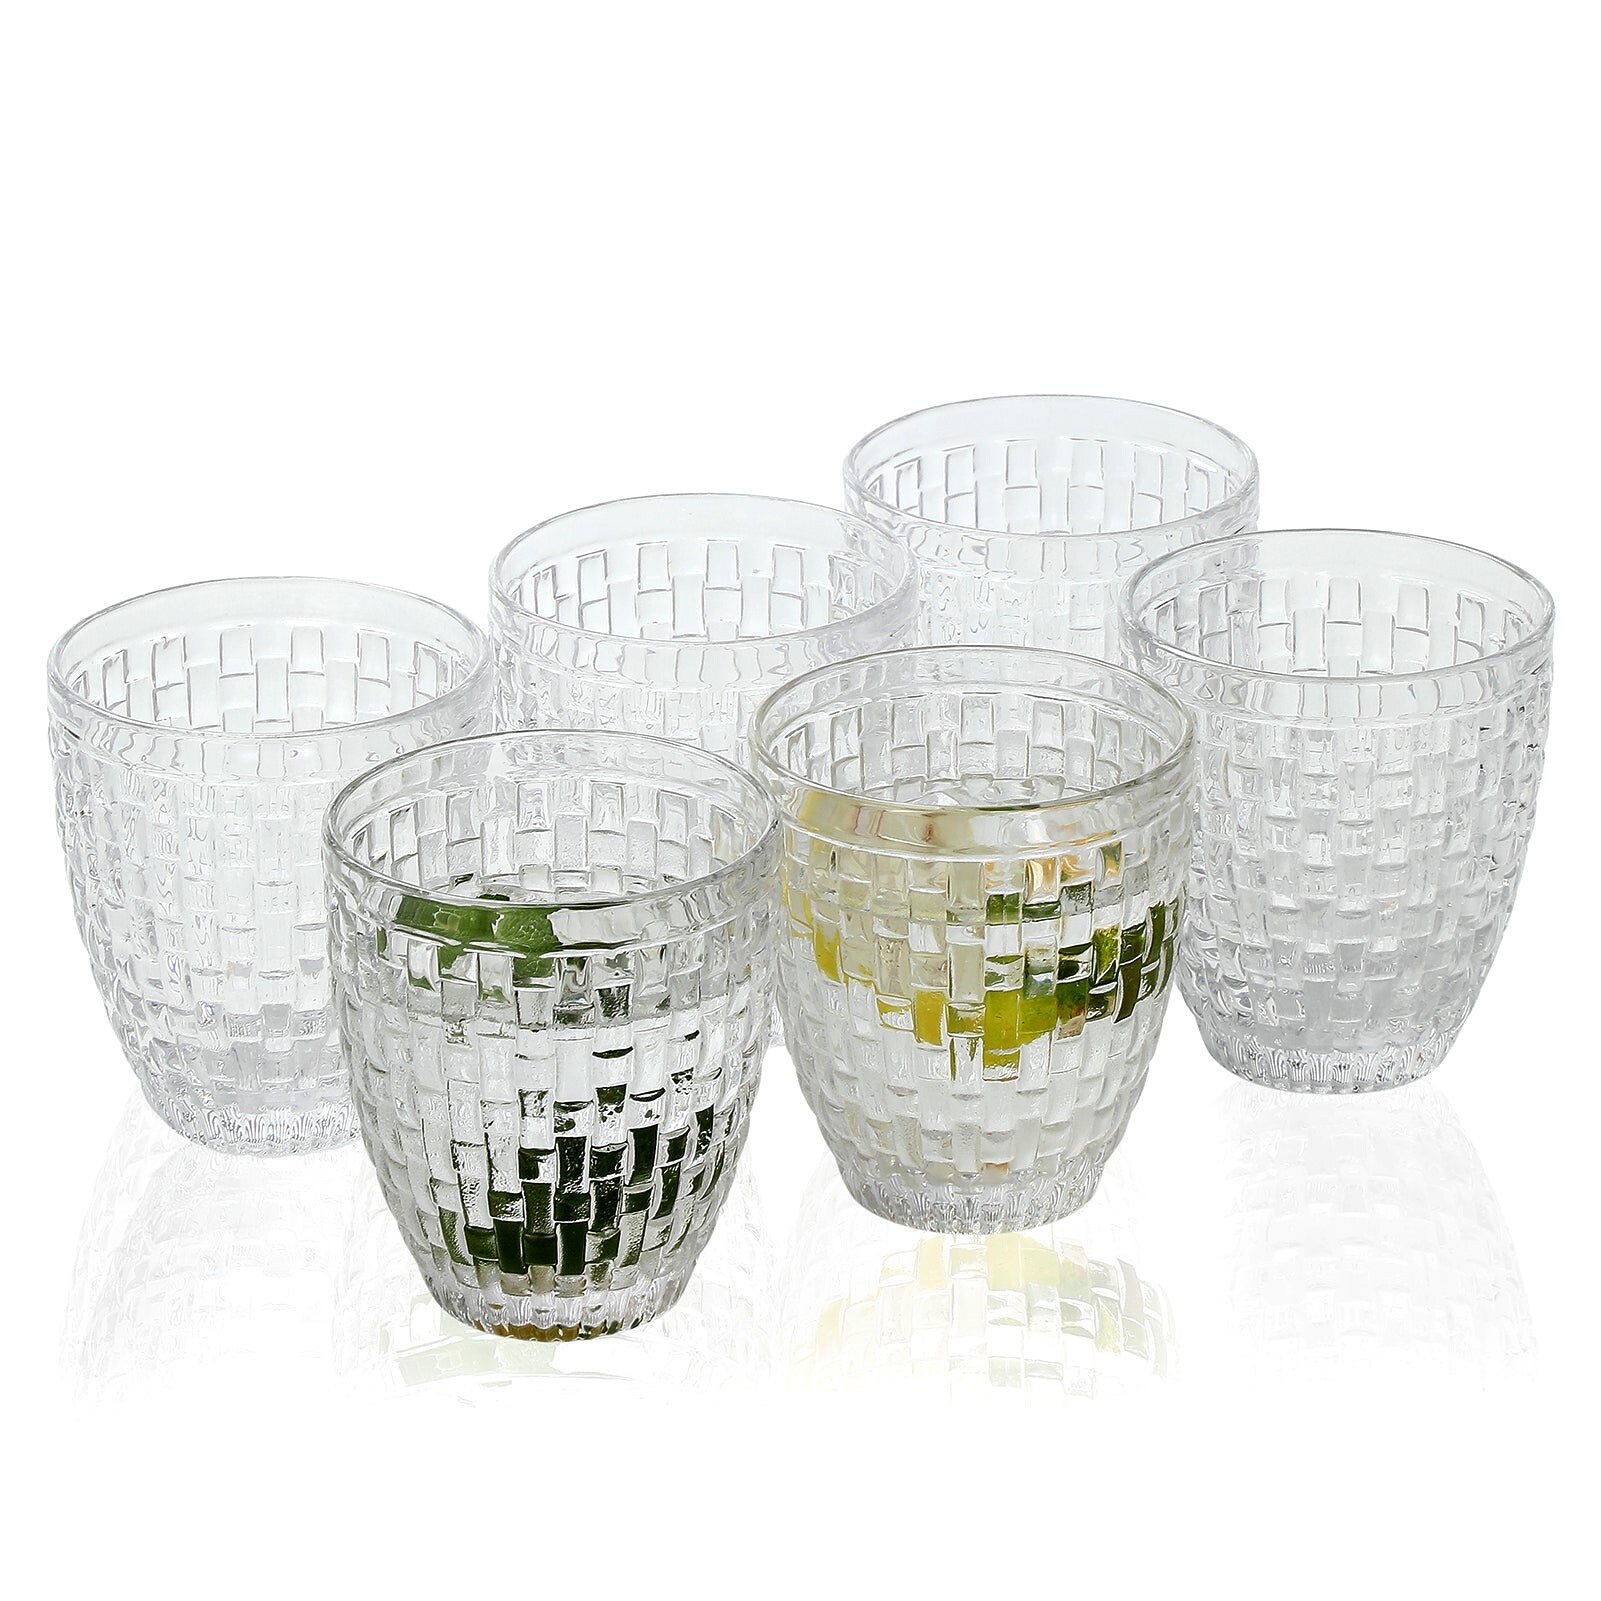 https://ak1.ostkcdn.com/images/products/is/images/direct/ffaef07d1ade25f9ece7bf356d234cd1e8010ed5/Knitted-Collection-Tumbler-Glasses-set-of-6.jpg